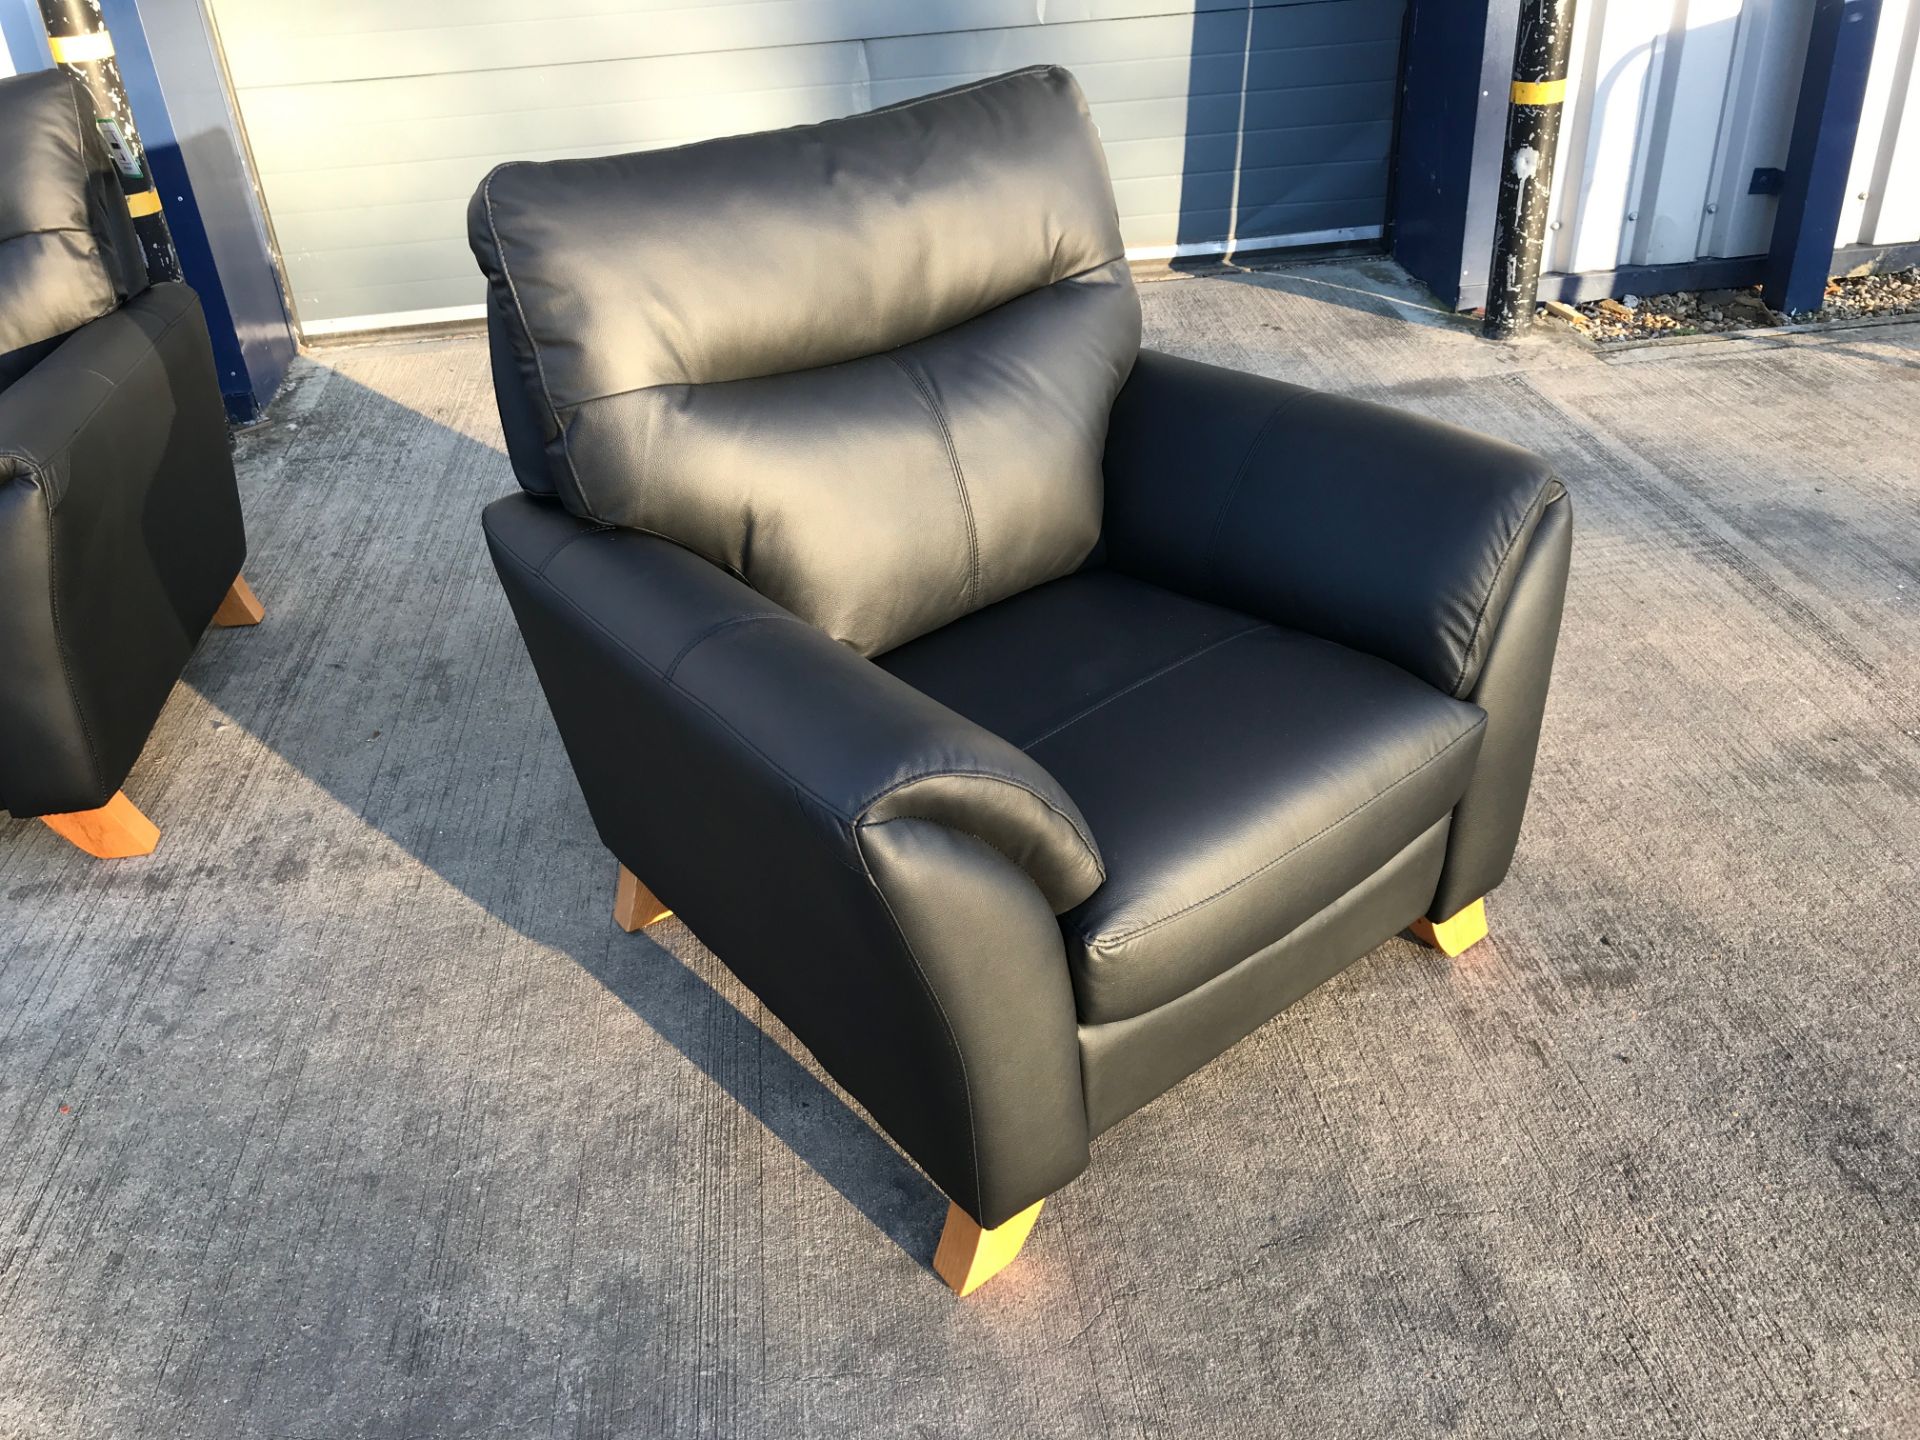 Cottesmore BLACK Single Seat Real Leather Chair - No Reserve - Image 2 of 6